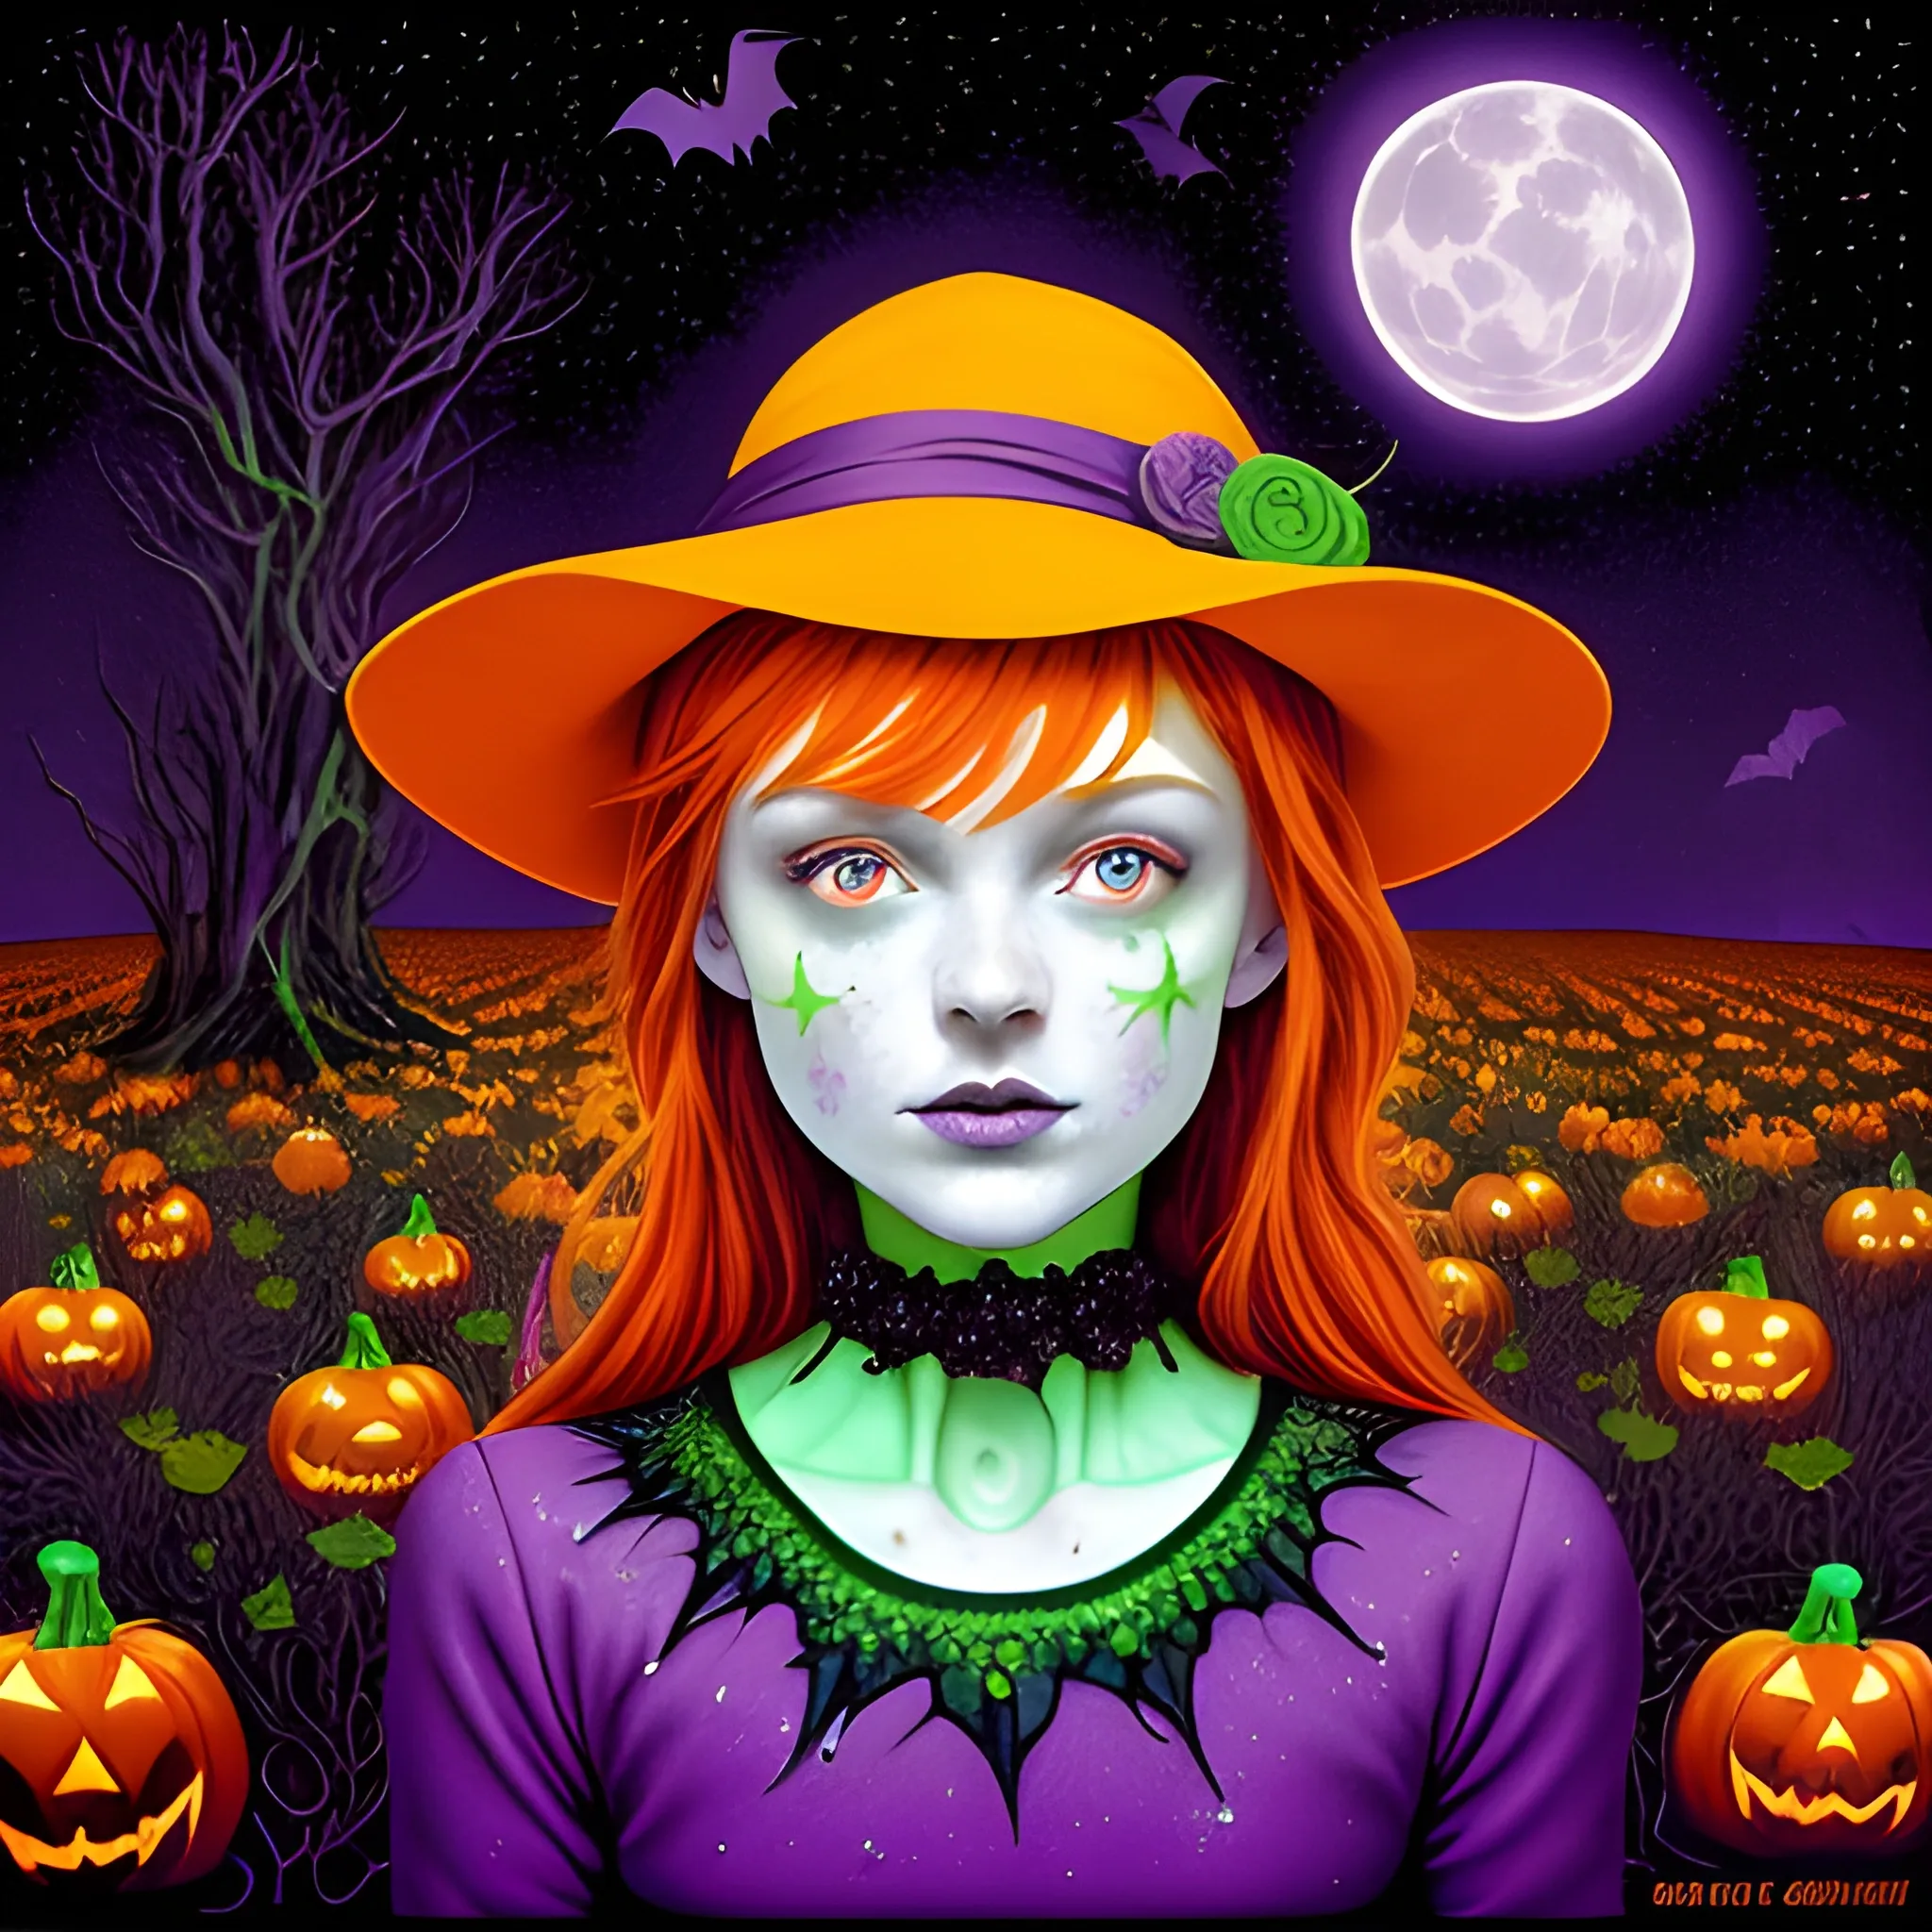 Bella Thorne / Sadie Sink face morph as a Halloween Witch, wearing a thorny witch hat adorned with thorns and black roses; Halloween, bats, full moon in a nebula sky, neon spray paint, acrylic paint, fantastical surrealist world, in the style of Stephen Gammell, extremely detailed, sick, gothic, eldritch, candles, neon grape purple, dayglo orange, chartreuse green, Halloween perfect purple pumpkins, green skulls, orange bats, magic, candles, cobweb, spider, glitter, luminous color sparkles, dayglo orange, neon grape purple, chartreuse green, hot pink, stars, sparkles, glitter, lanterns, gourds, Halloween; Goddess of the Night with a crescent moon and many stars in the style of Maxfield Parrish, starry night, James R. Eads